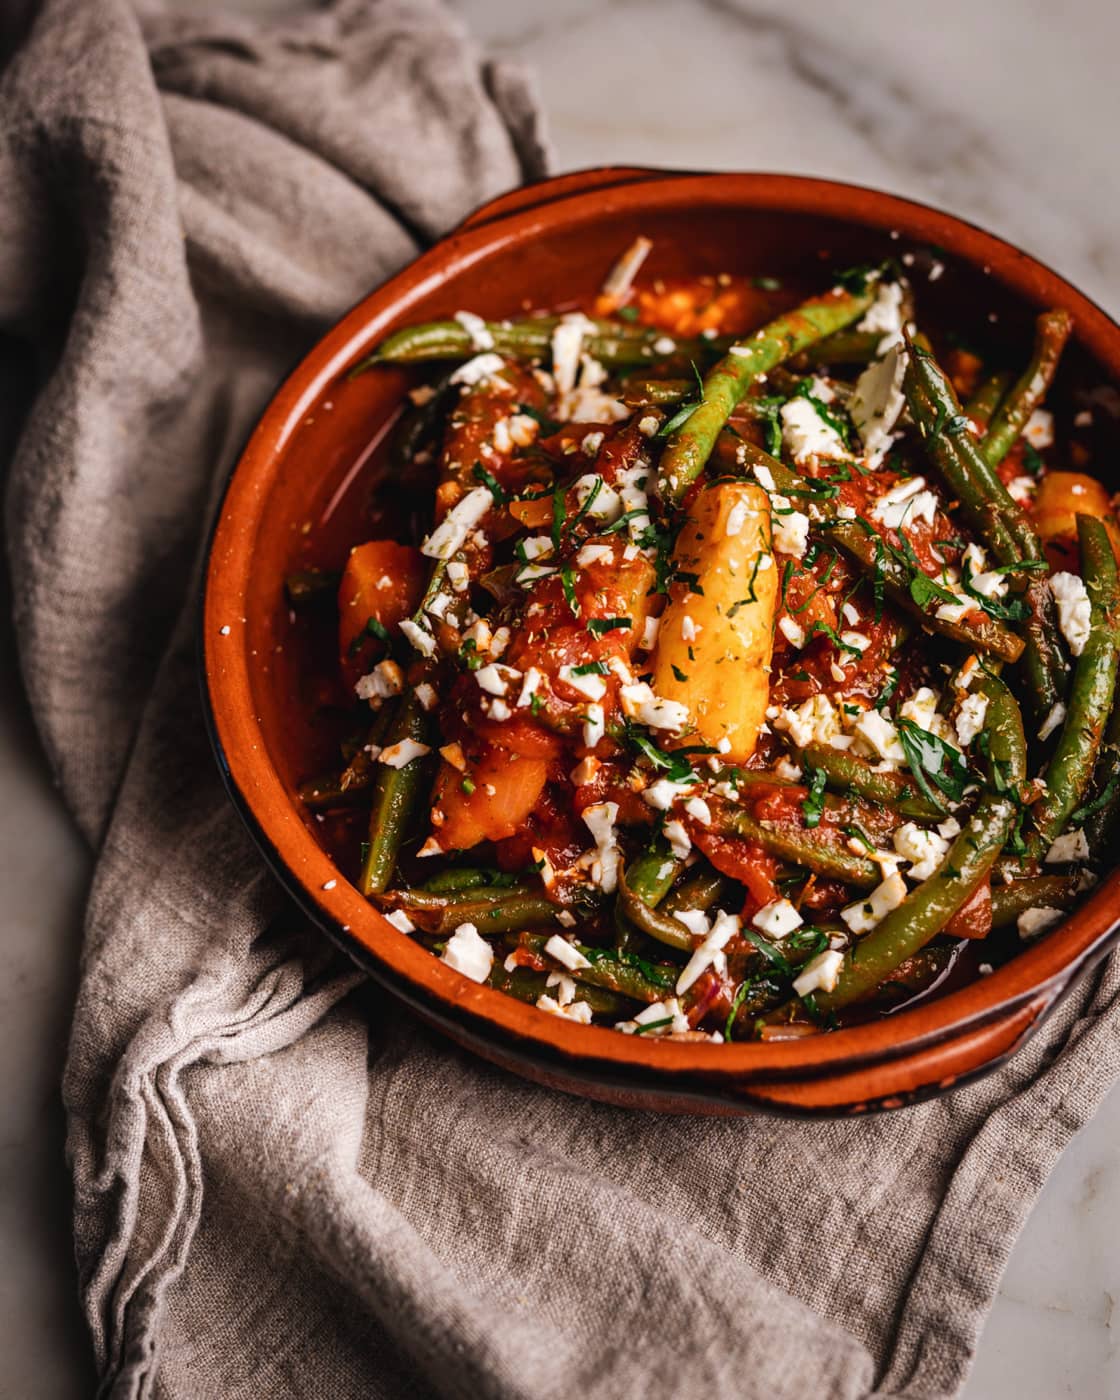 GREEN BEANS IN TOMATO SAUCE